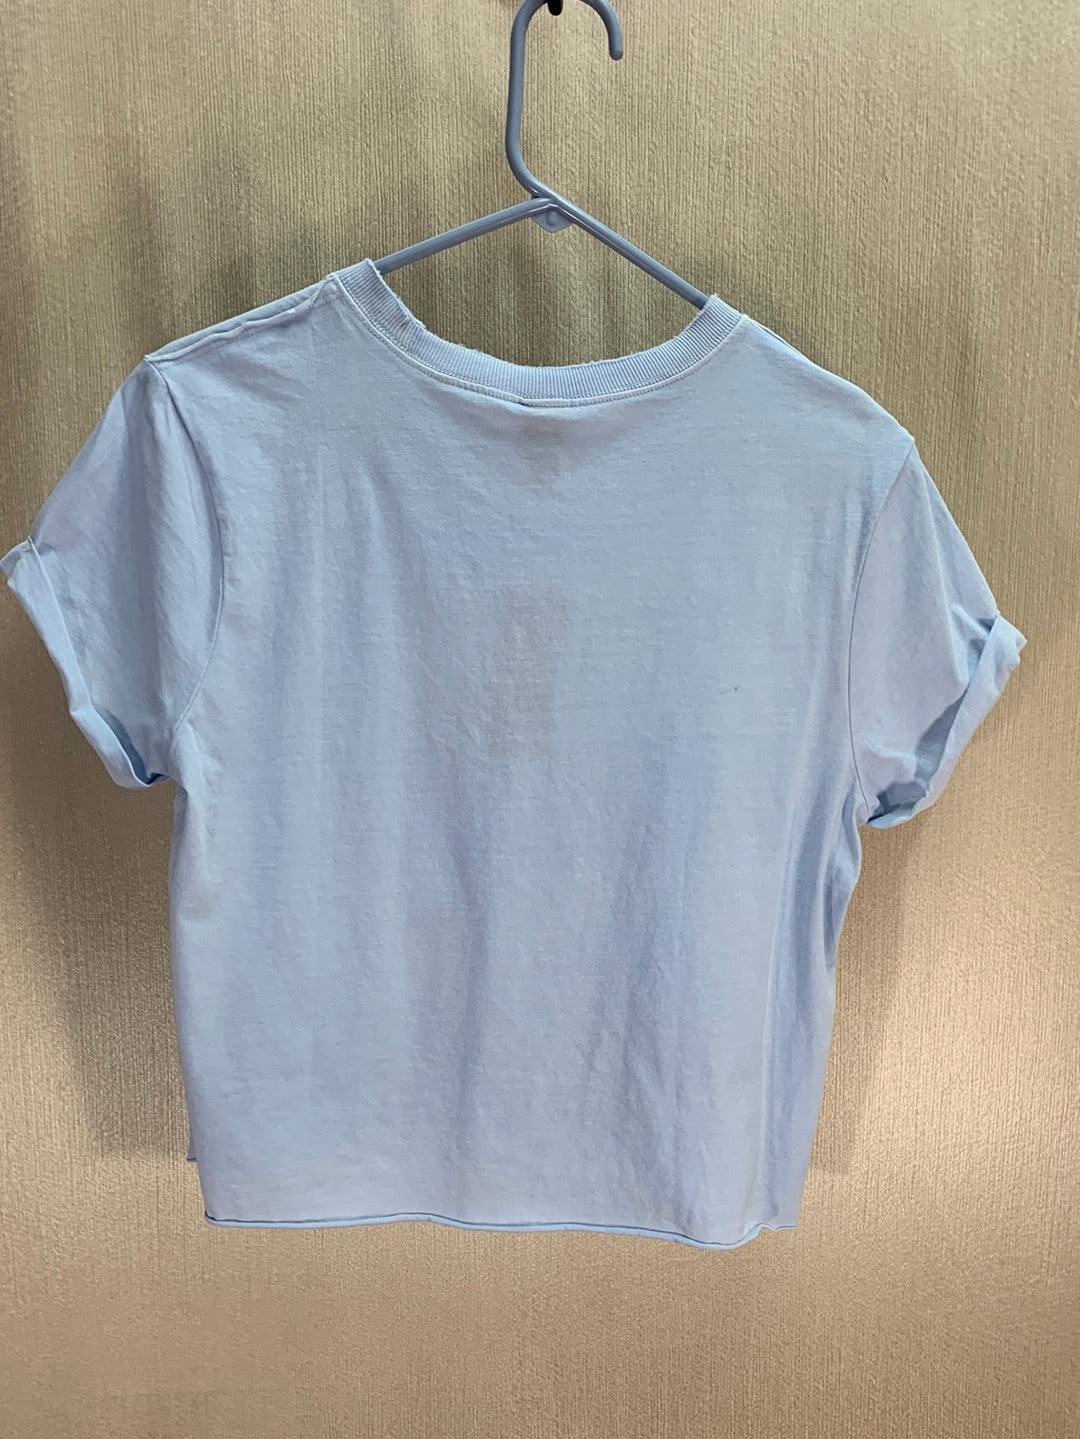 NWT - WILD FABLE light blue Cropped Short Sleeve Crew Neck T-Shirt Top - S